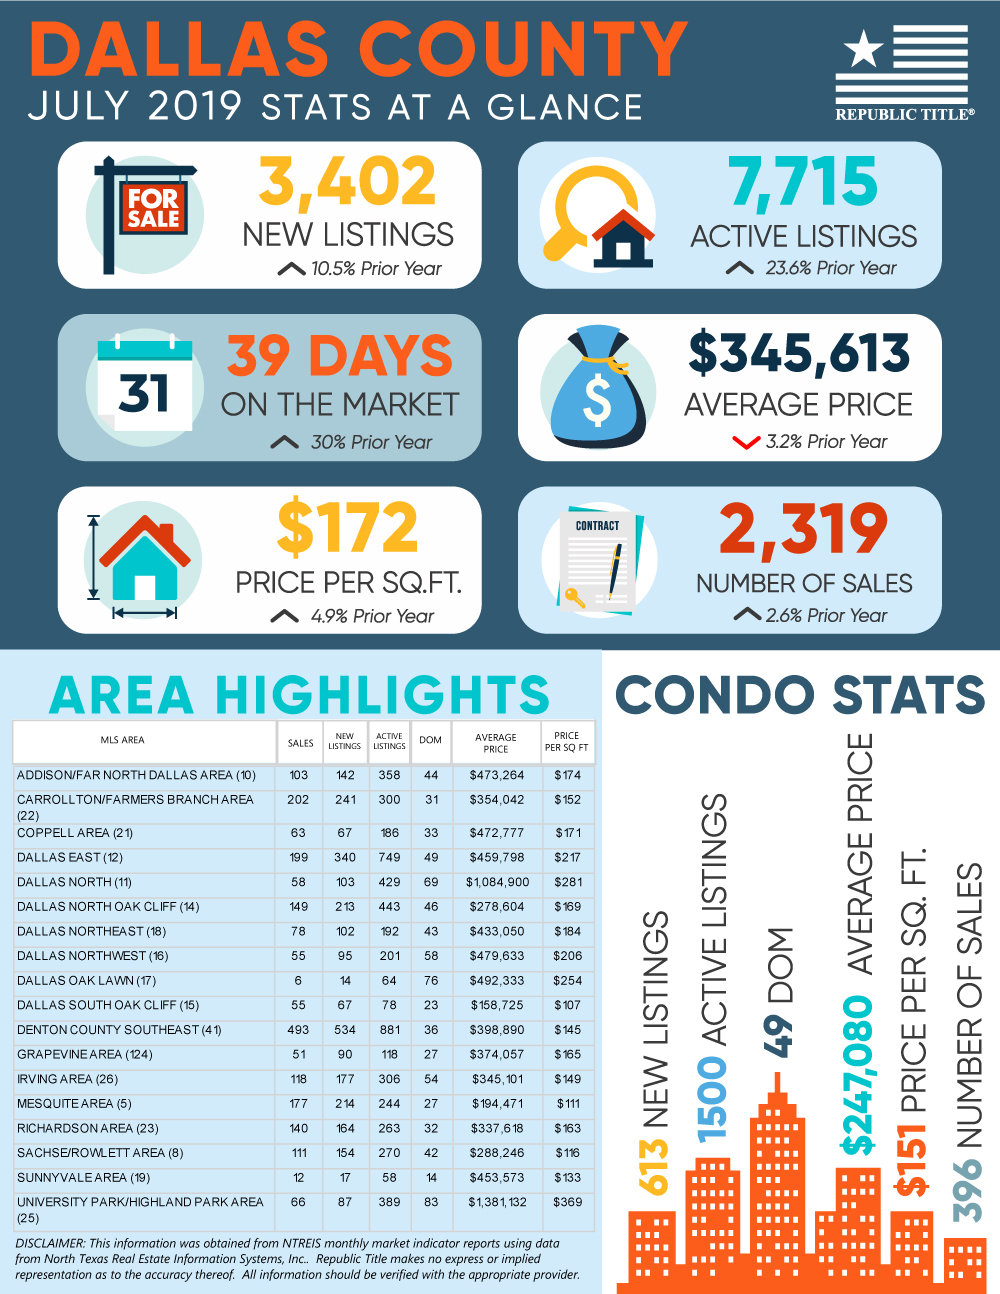 Dallas County, TX Housing Market Update - July 2019 Home & Condo Stats